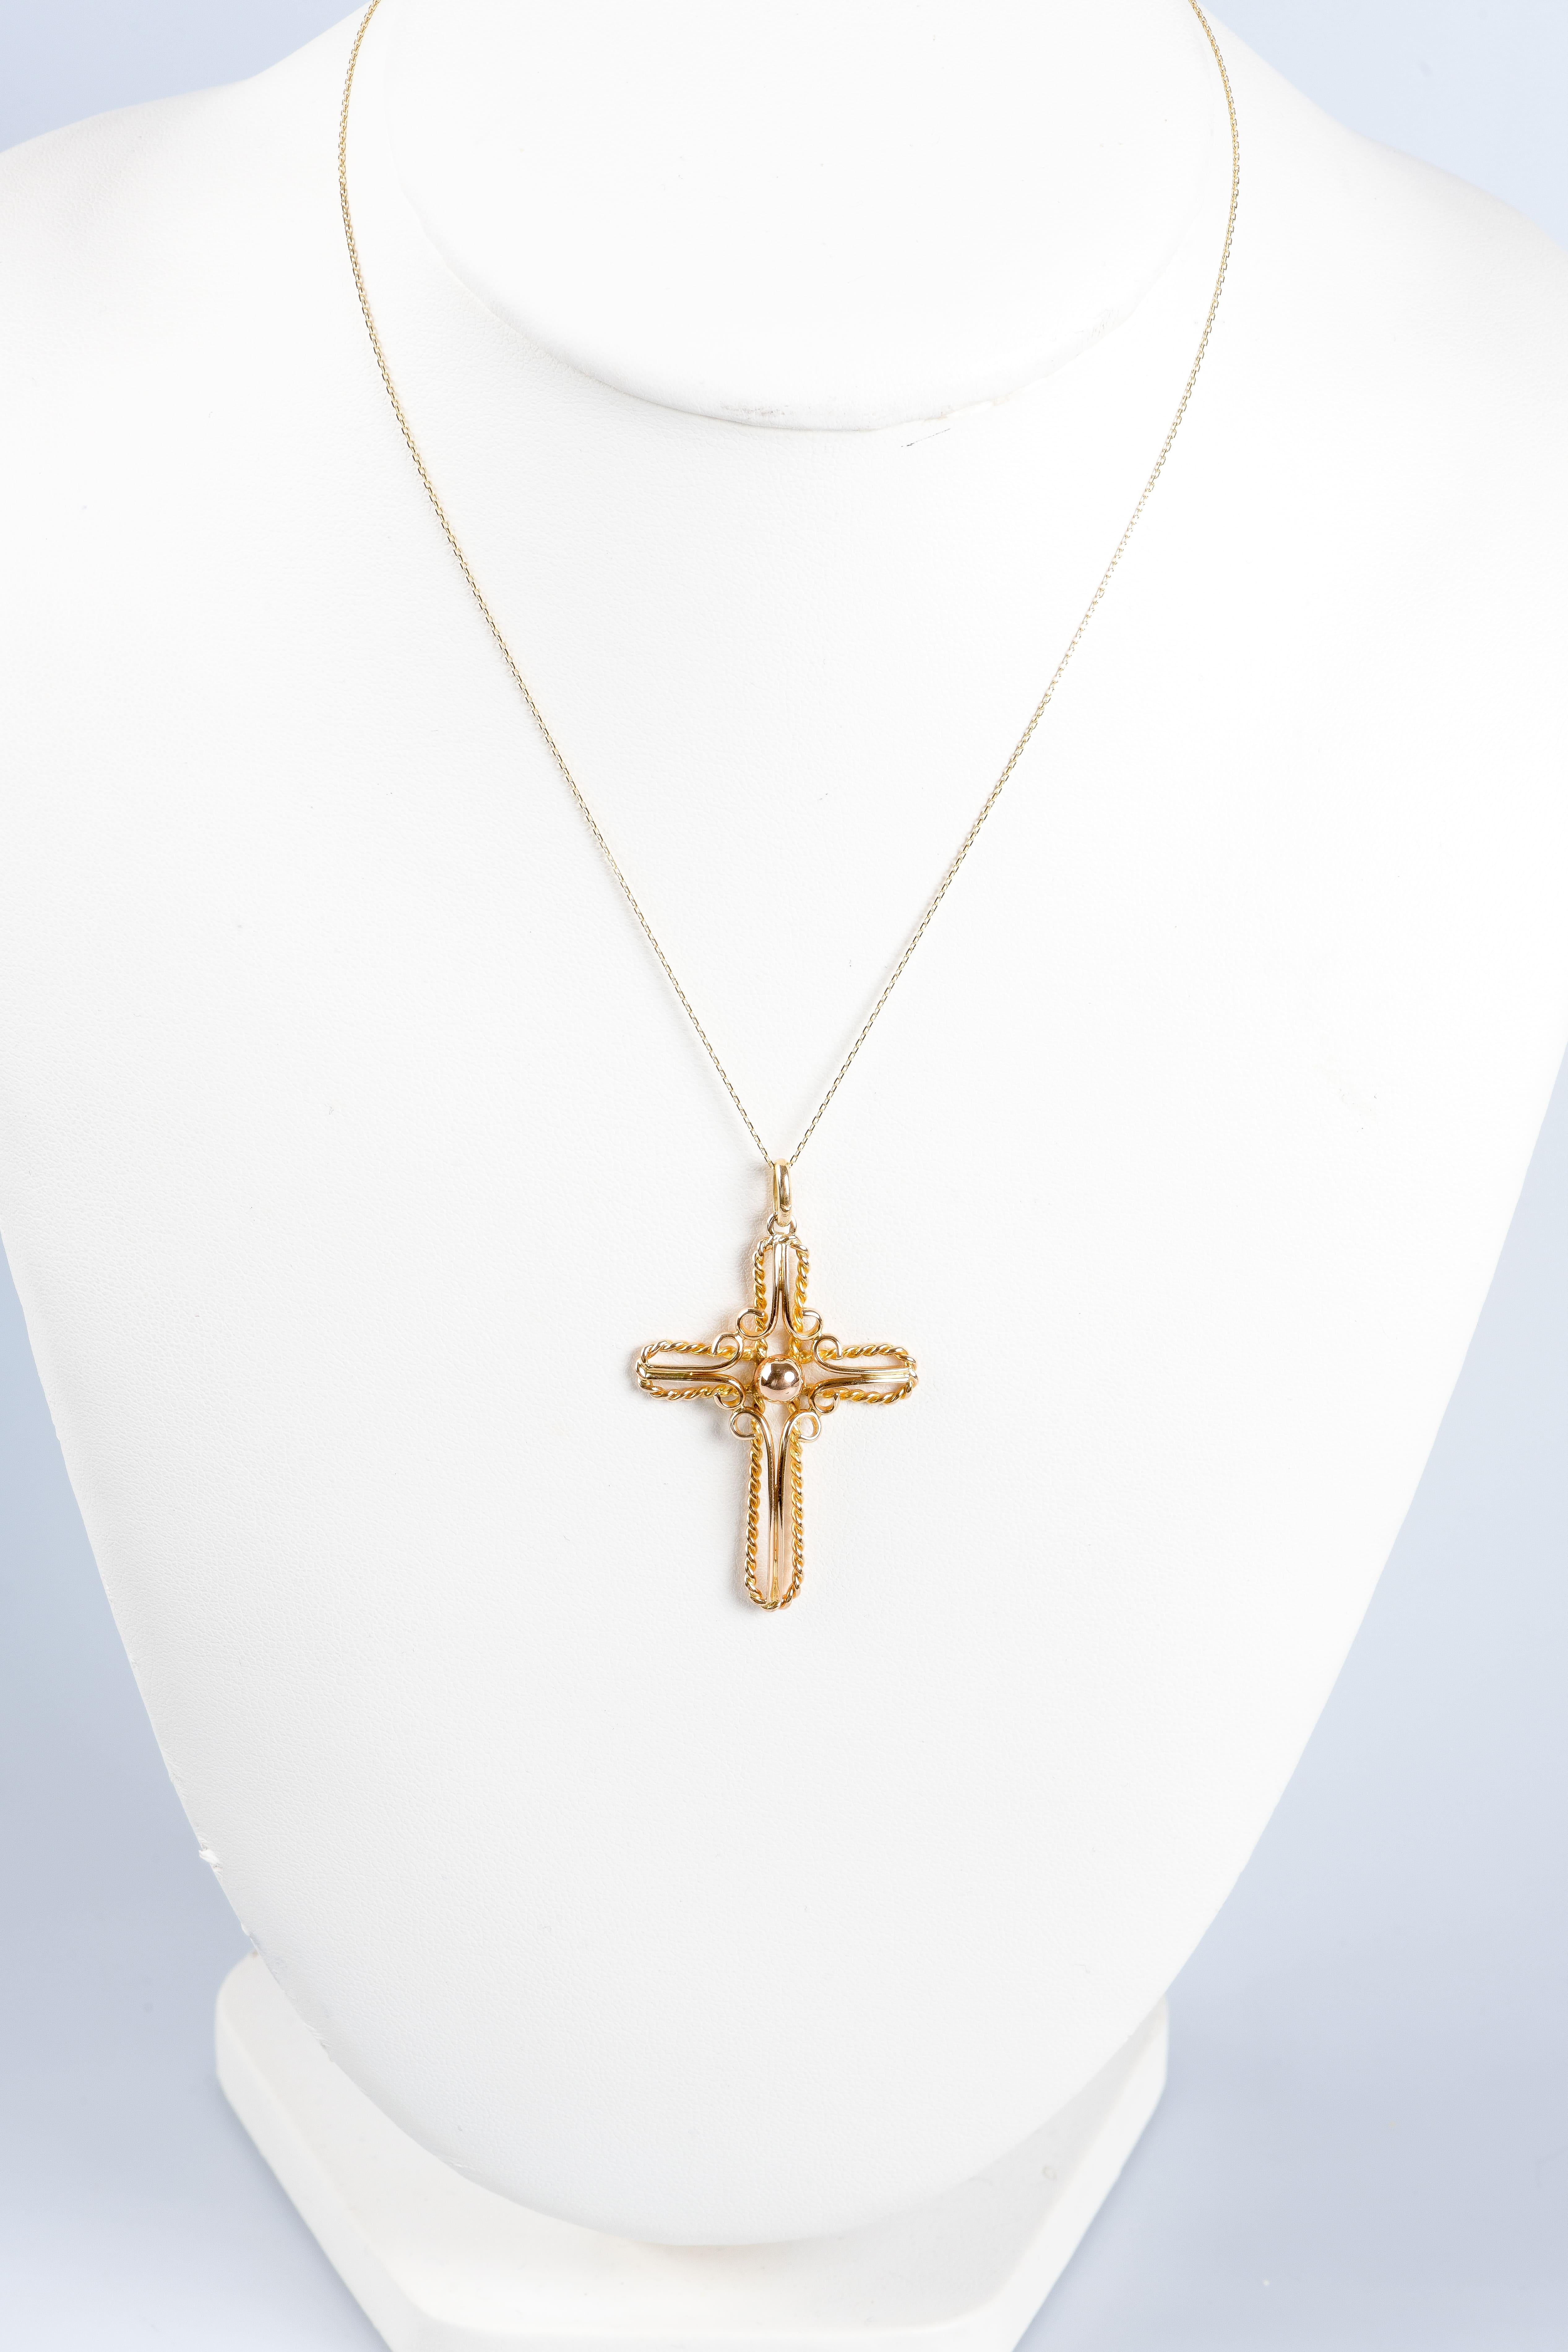 Knitted necklace with cross-shaped pendant in 18K yellow gold. The cross is made with gold thread and this technique allows to create a very fine and delicate jewel that highlights the beauty and brilliance of gold. The complex construction of the